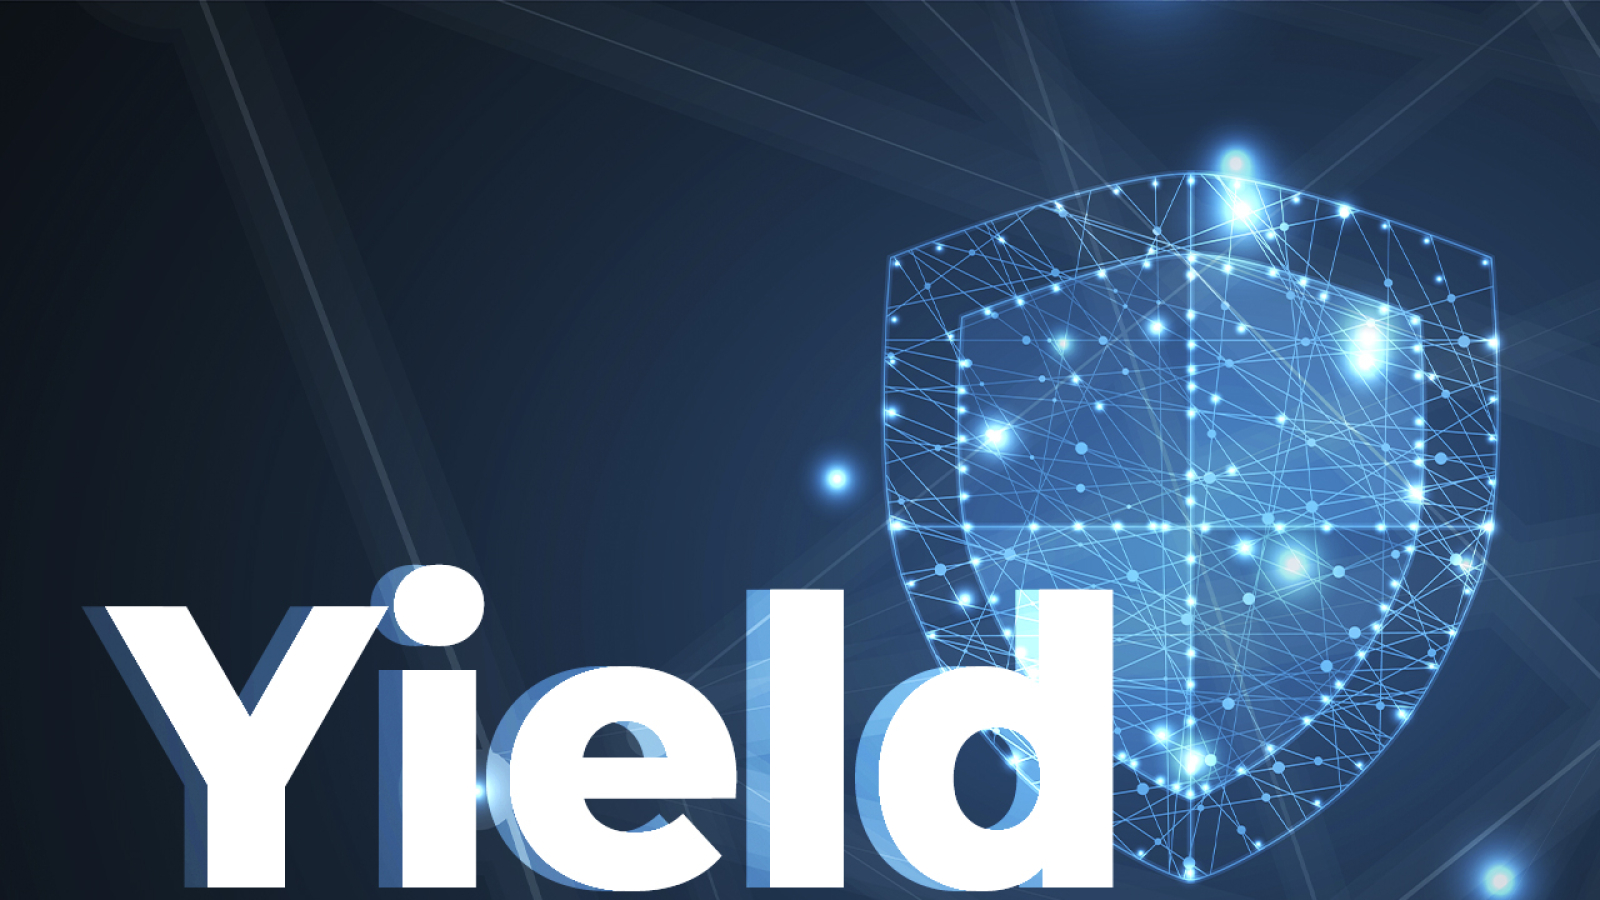 Yield App Passes ‘Proof of Reserves’ Audit to Bolster Safety and Accountability of Deployed Digital Assets